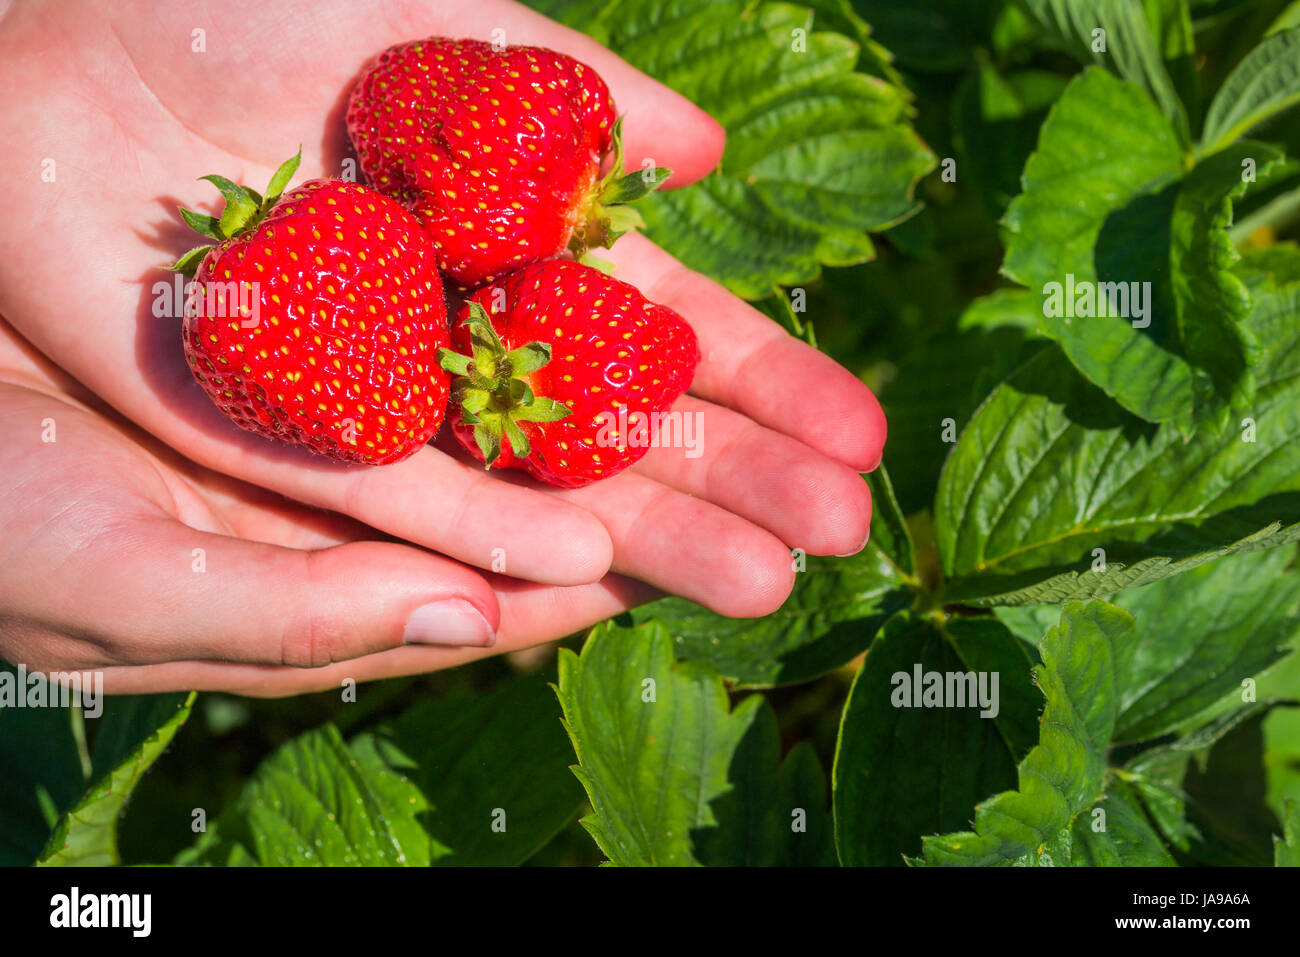 Three fresh picked delicious strawberries held over strawberry plants Stock Photo